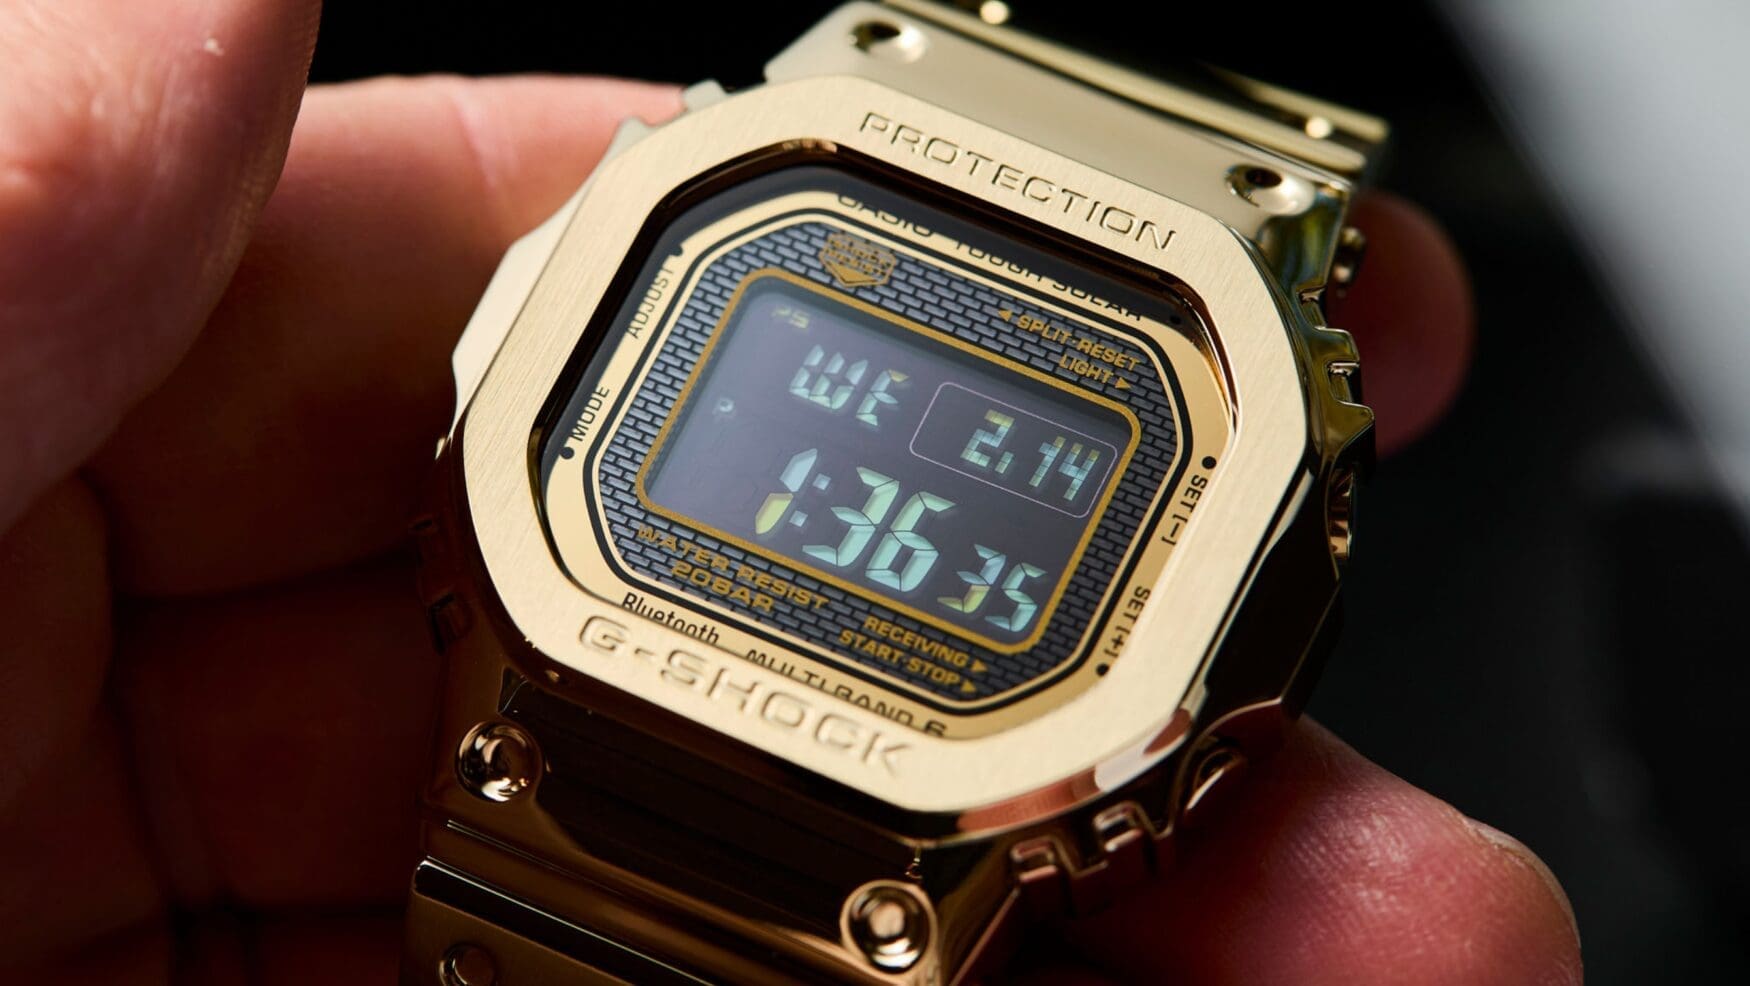 Exciting news: Casio & G-Shock have arrived at the Time+Tide Shop